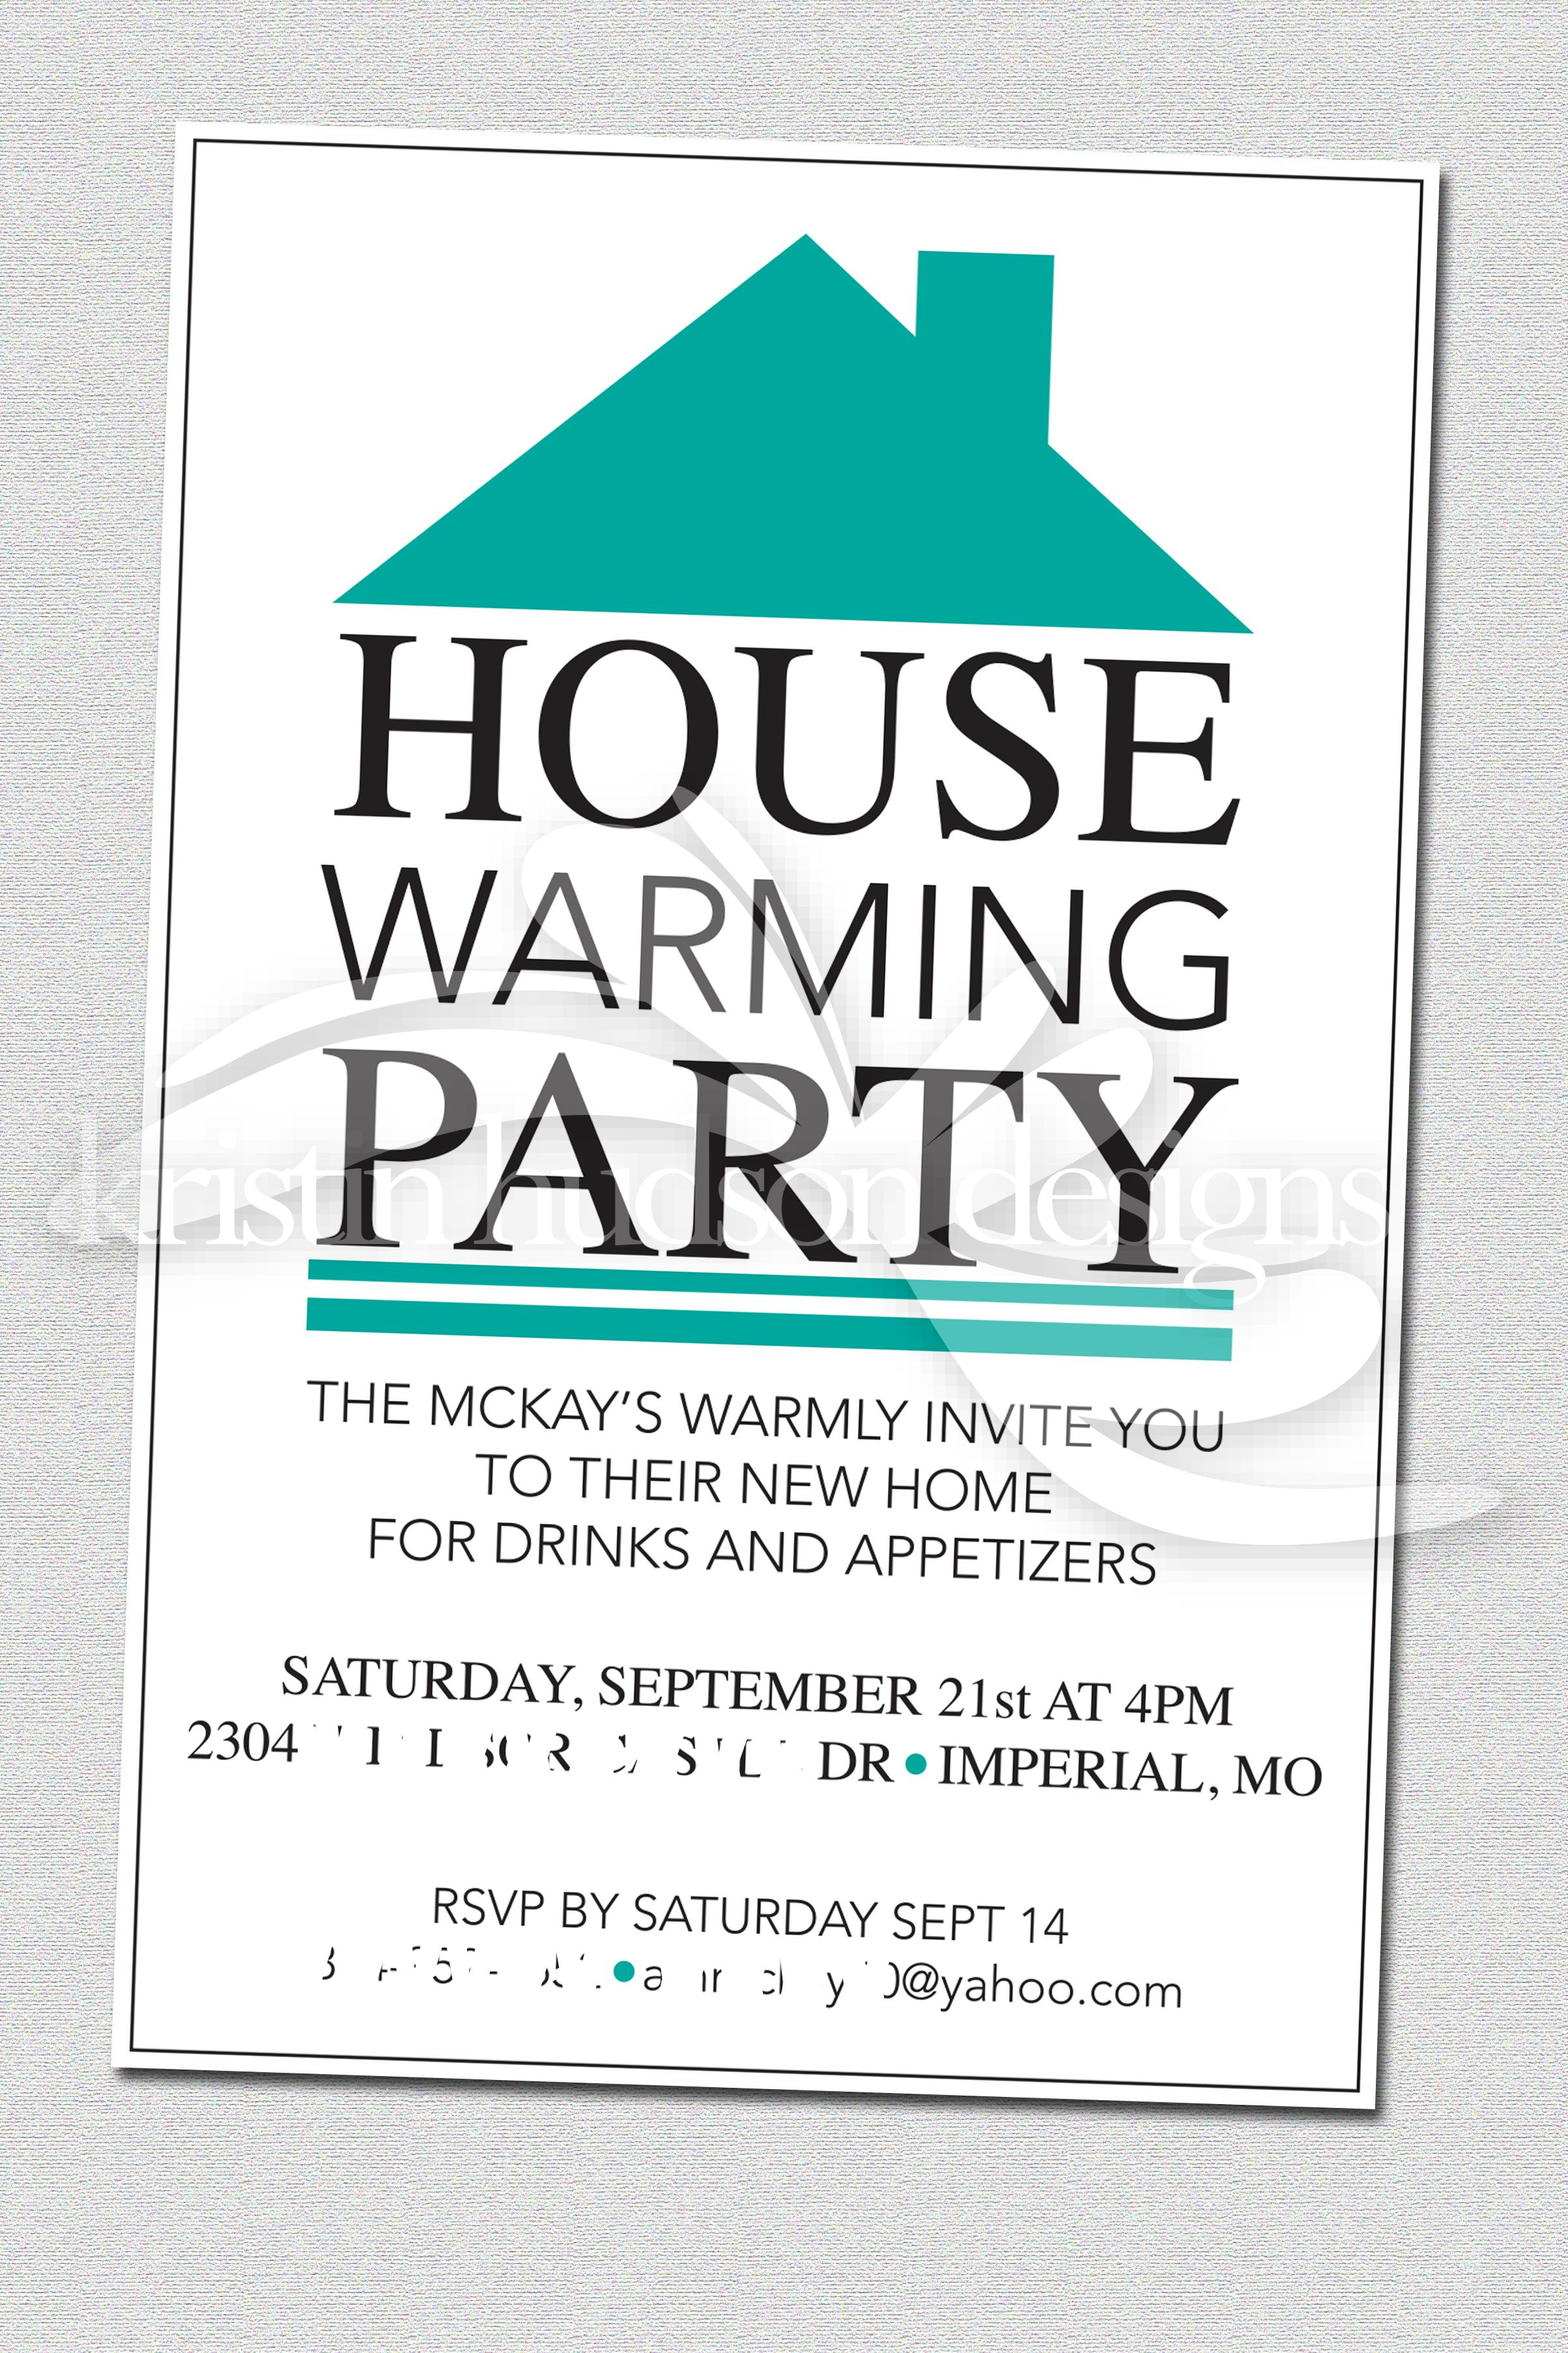 House Warming Party Invite Designs Kristin Hudson Invitations intended for dimensions 2407 X 3611